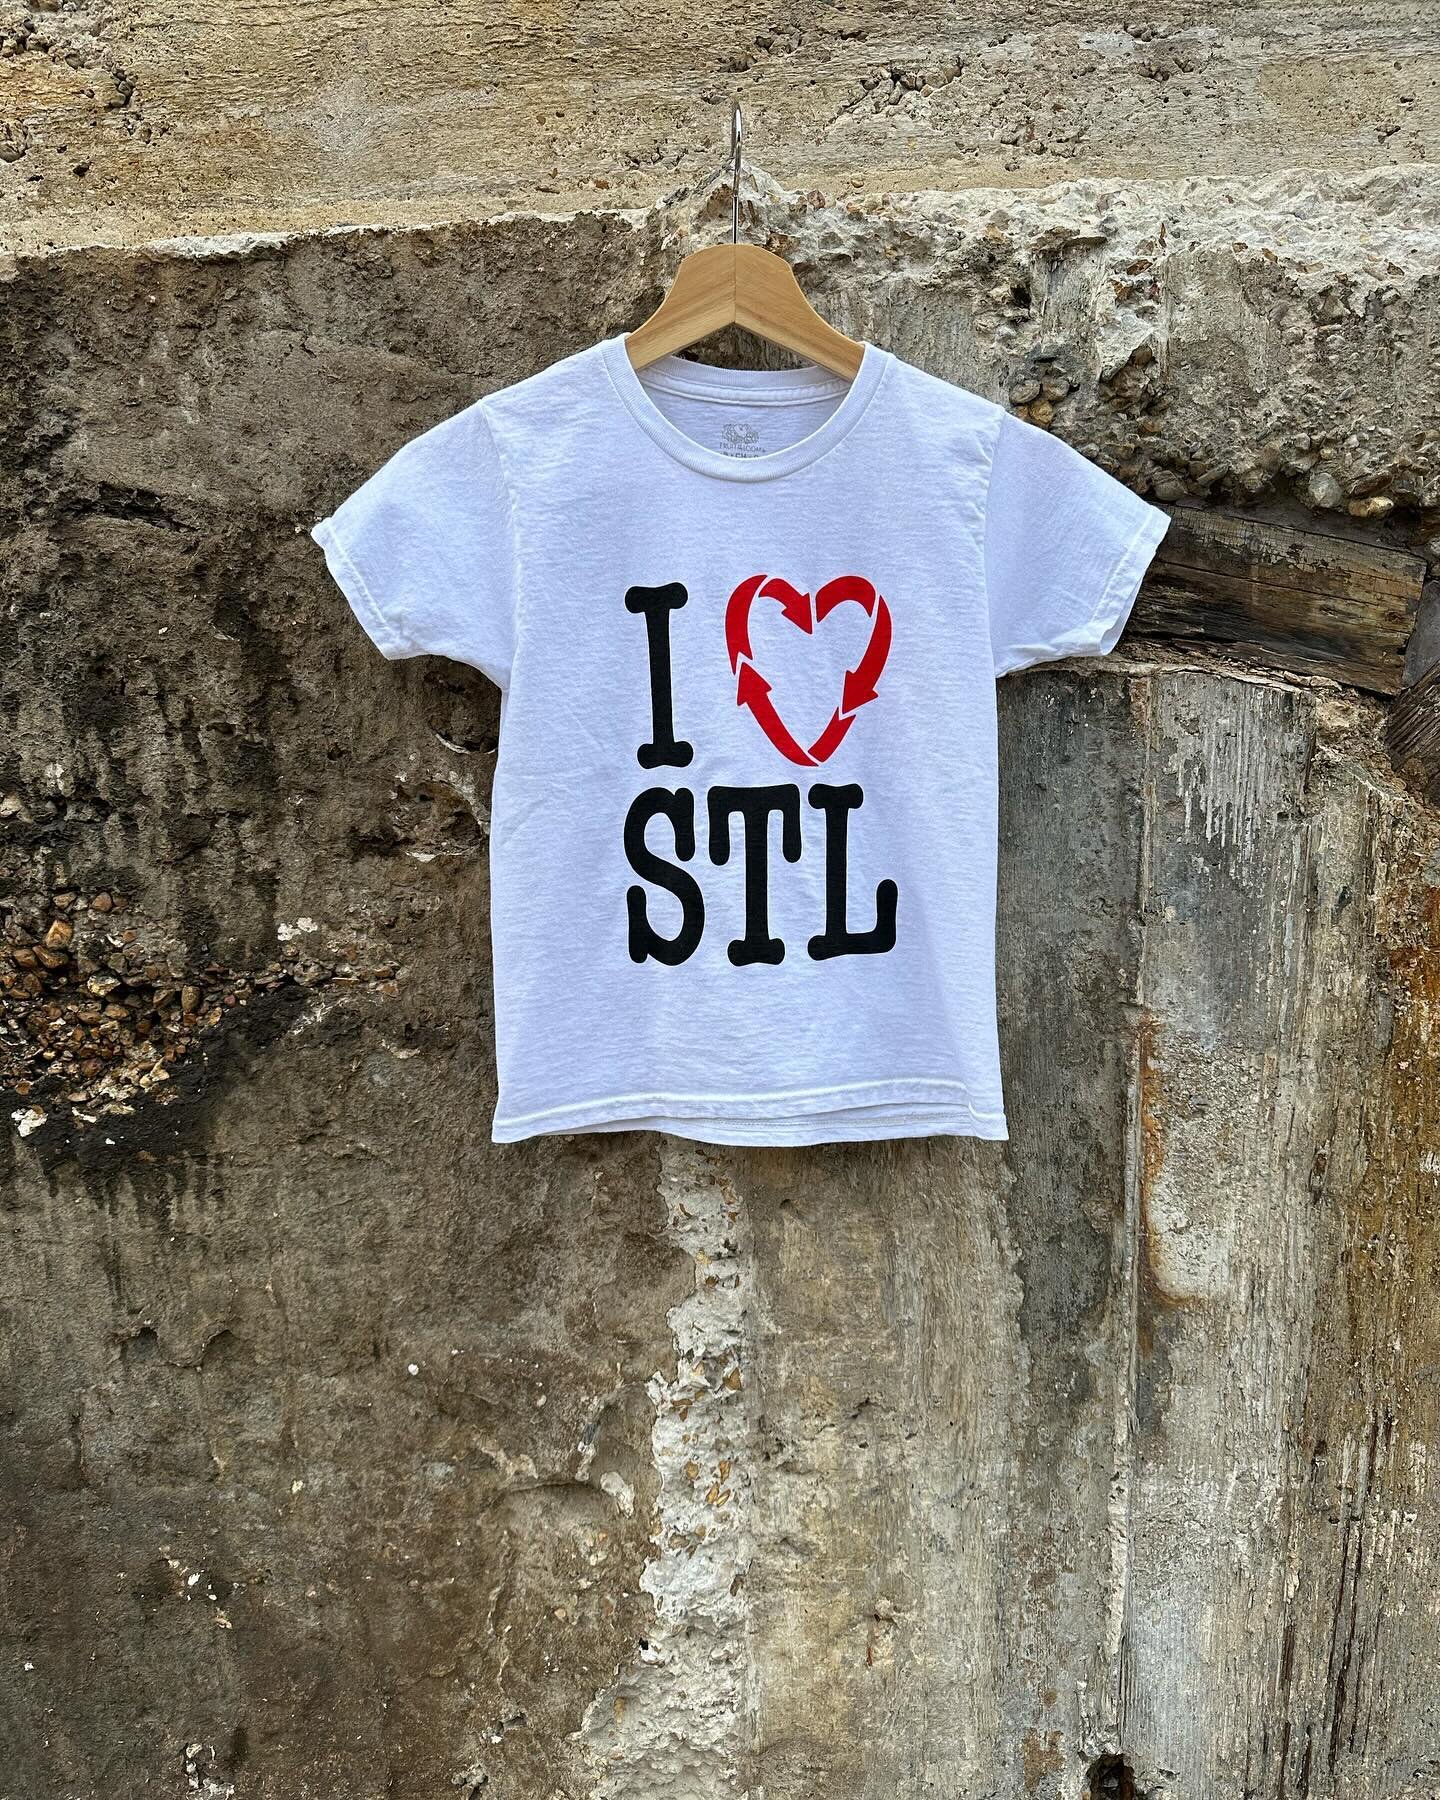 Happy 314 day, St Louis! Show your love for this incredible city in one of our I ❤️ STL tees - recycled with love &amp; printed by @triplethreatprintco. Grab one of these tees at our @cityfoundrystl location or dm to have one shipped. Available in si